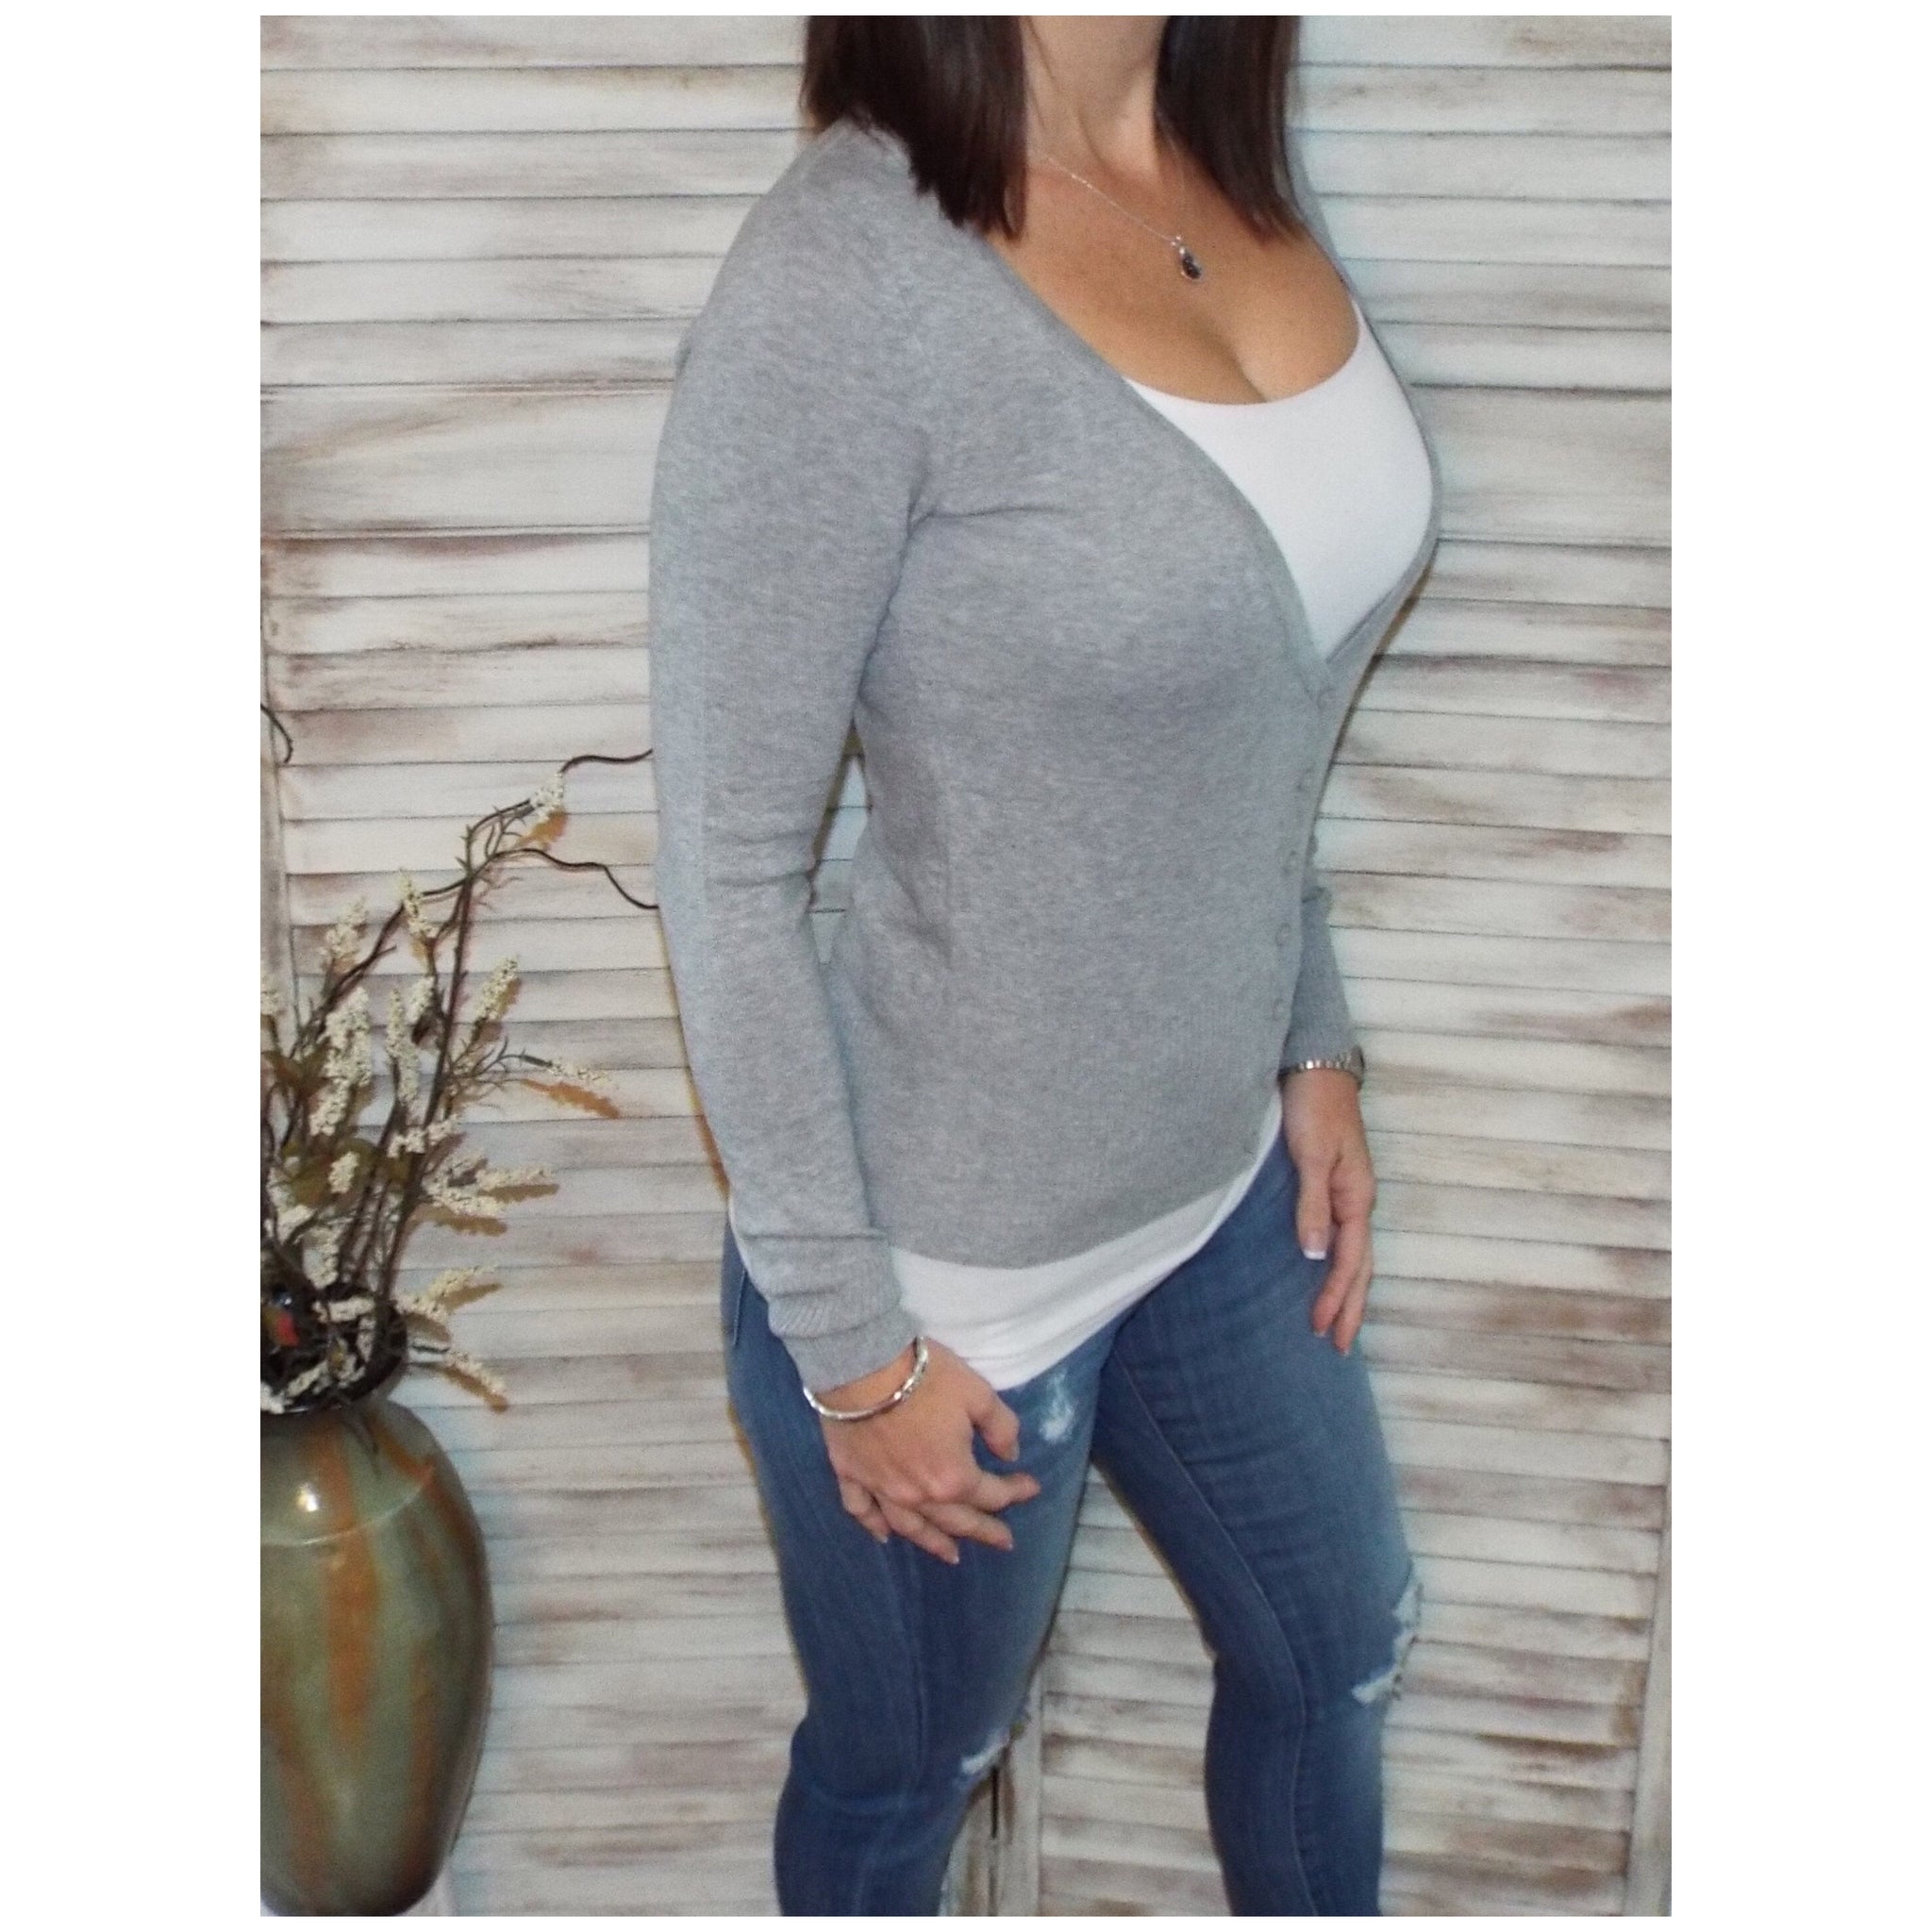 Sexy Preppy Cropped Cleavage Button Up Cardigan Long Sleeve Sweater Gray